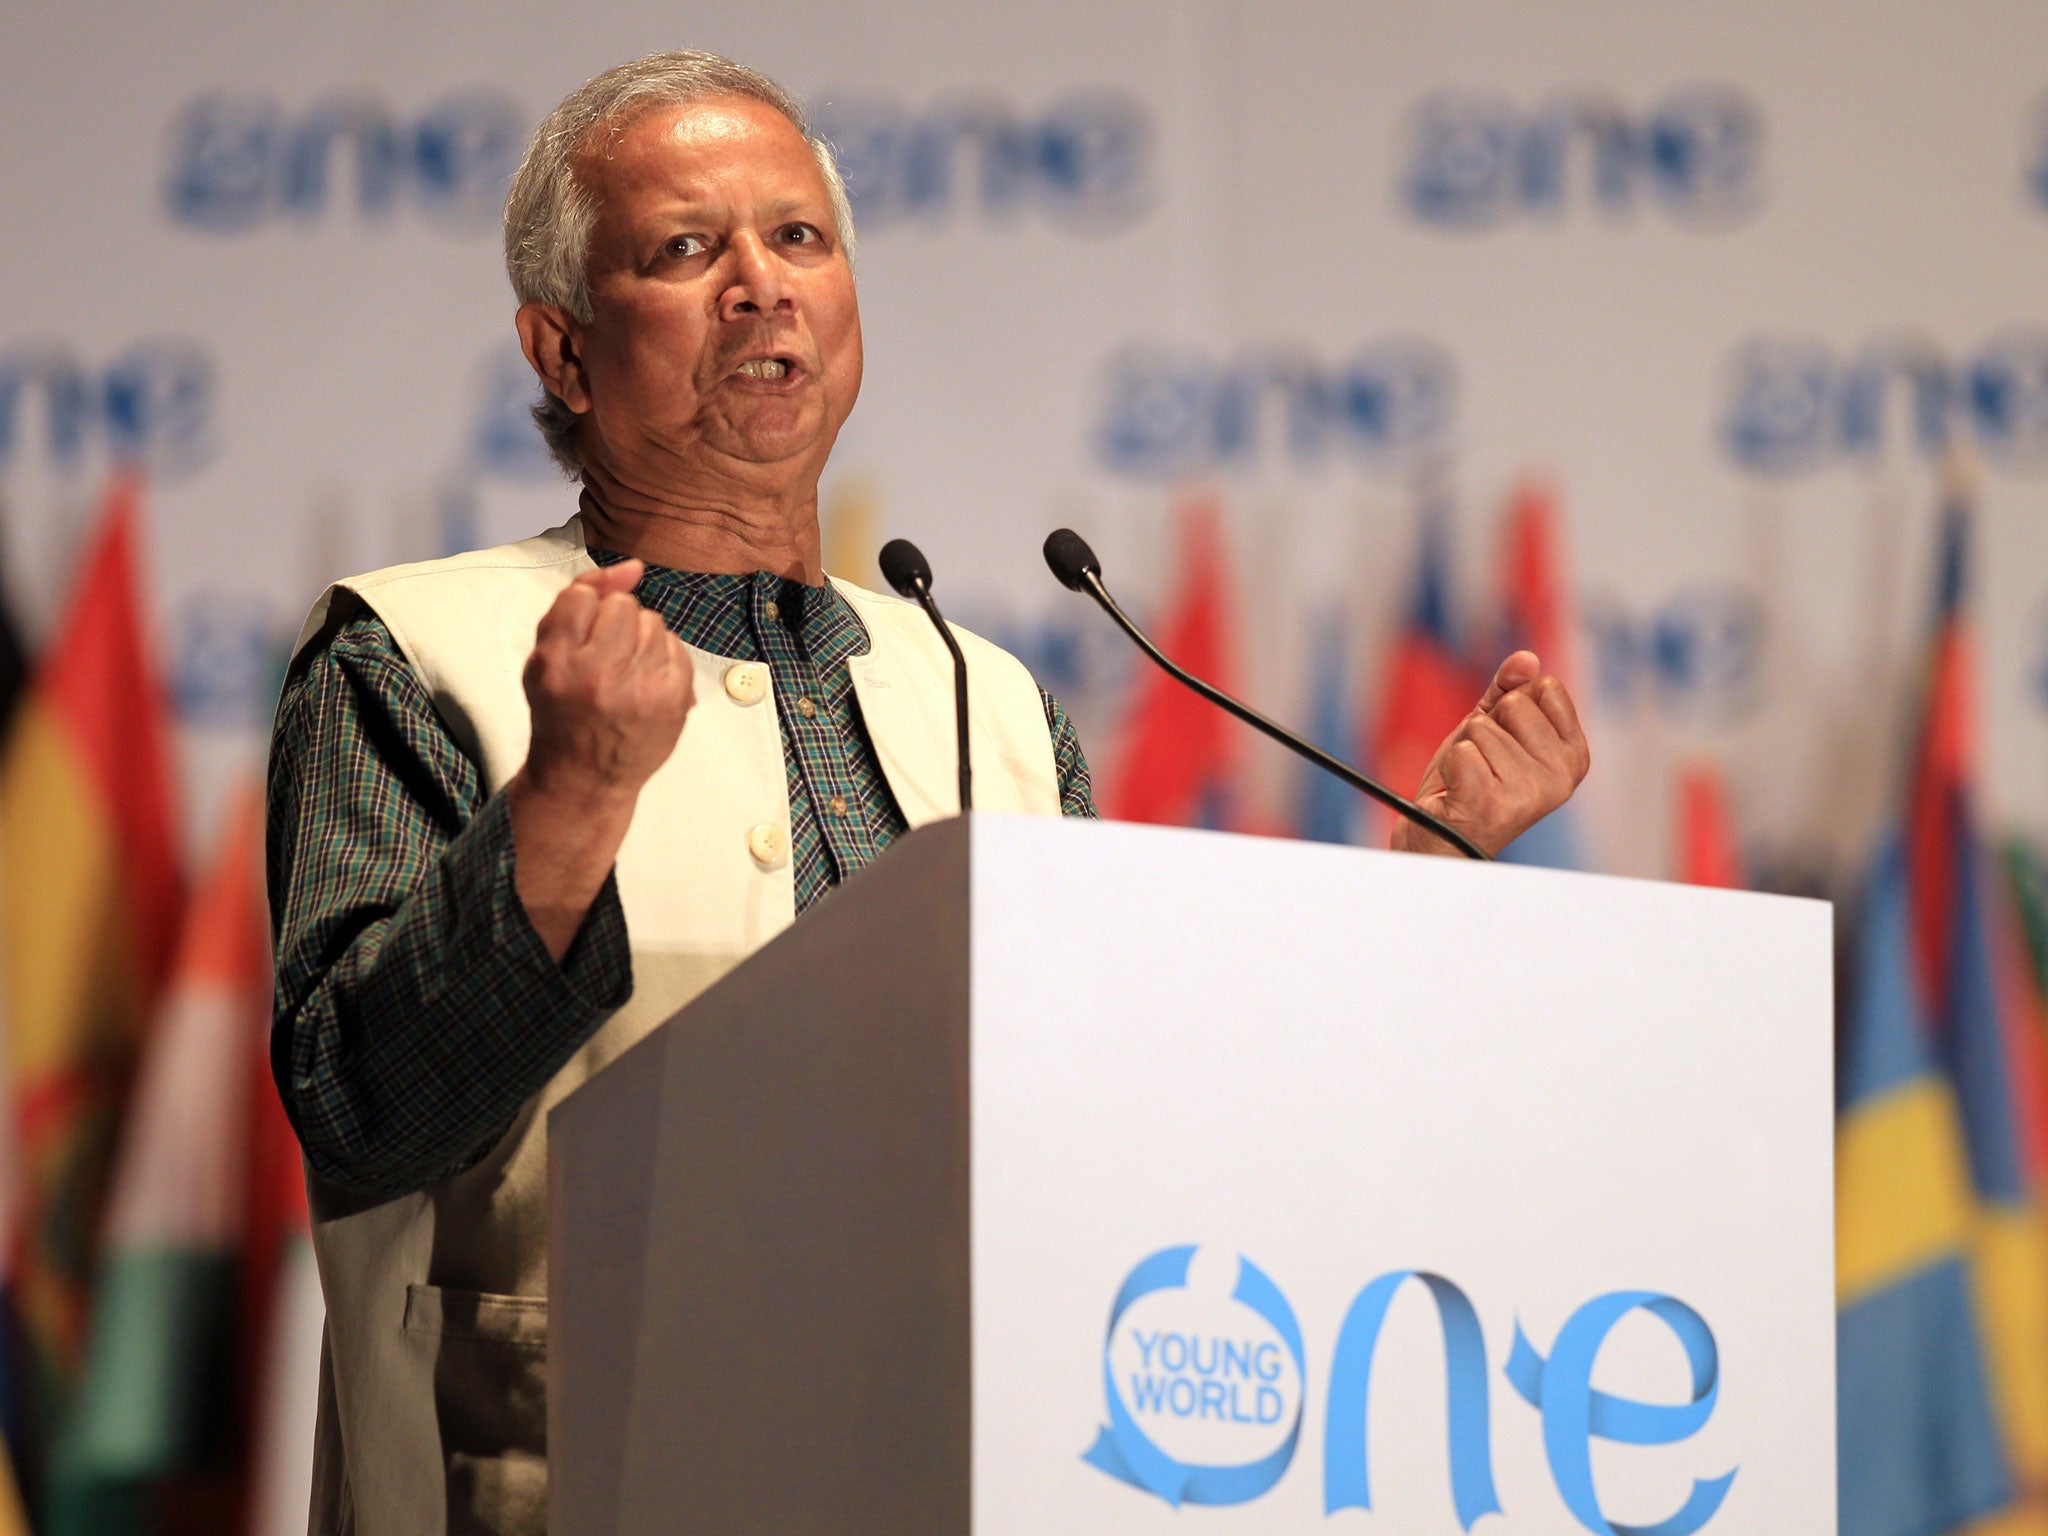 But Mr Yunus and the government have argued in recent years over the running of the bank